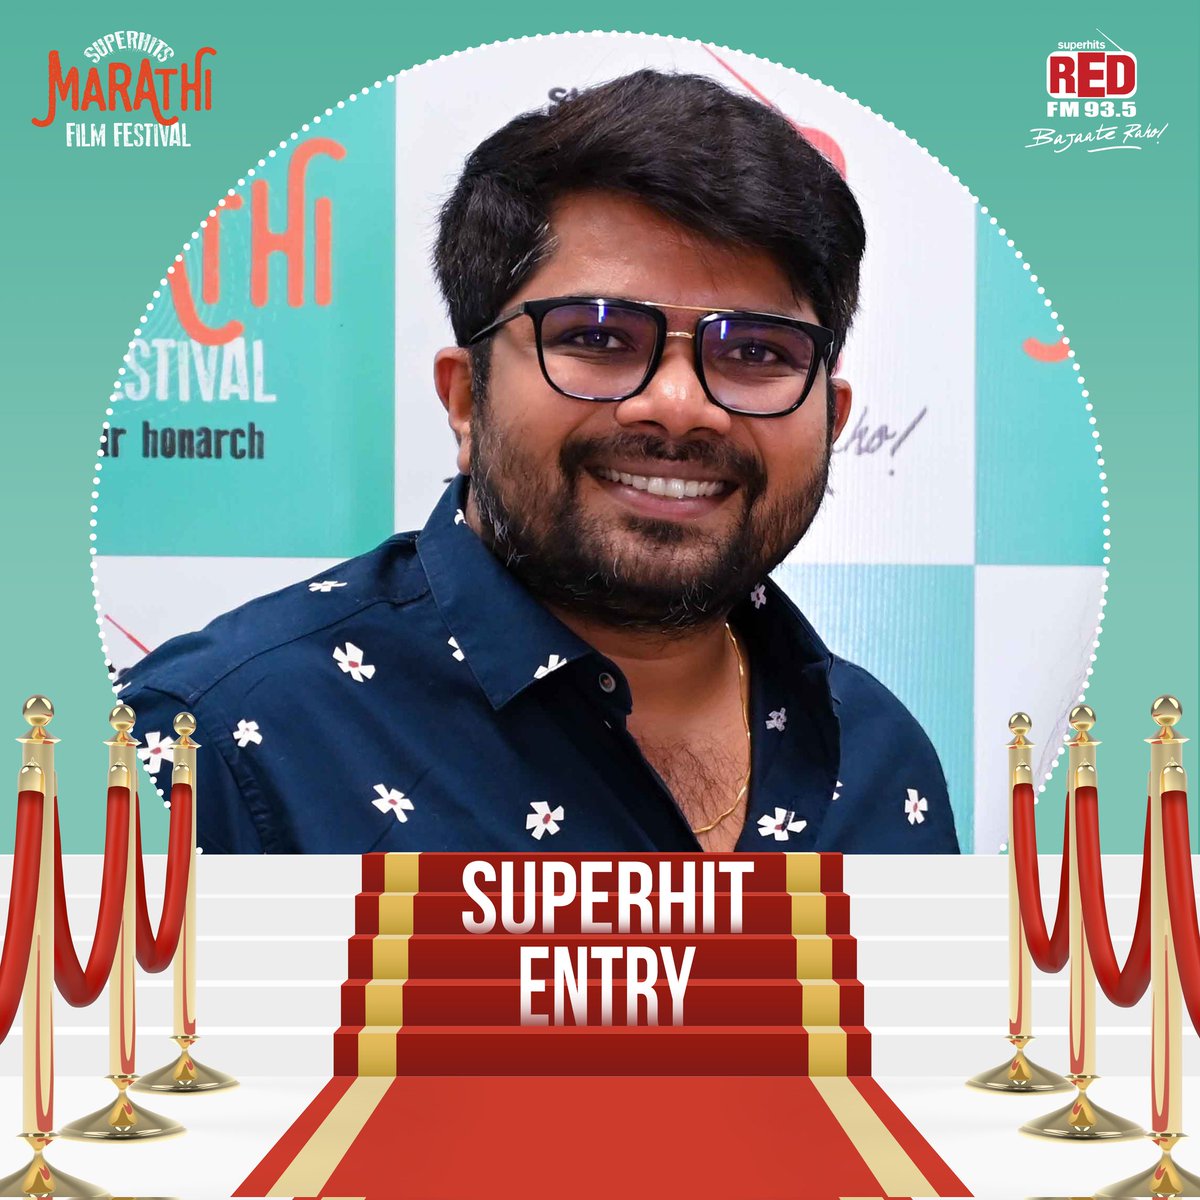 The versatile actor, writer and director Hemant Dhome was at the Superhits Marathi Film Festival today for the screening of his movie #Jhimma 🎥🎞️🍿!!

@hemantdhome21
#MFF2023 #SuperhitsMarathiFilmFestival